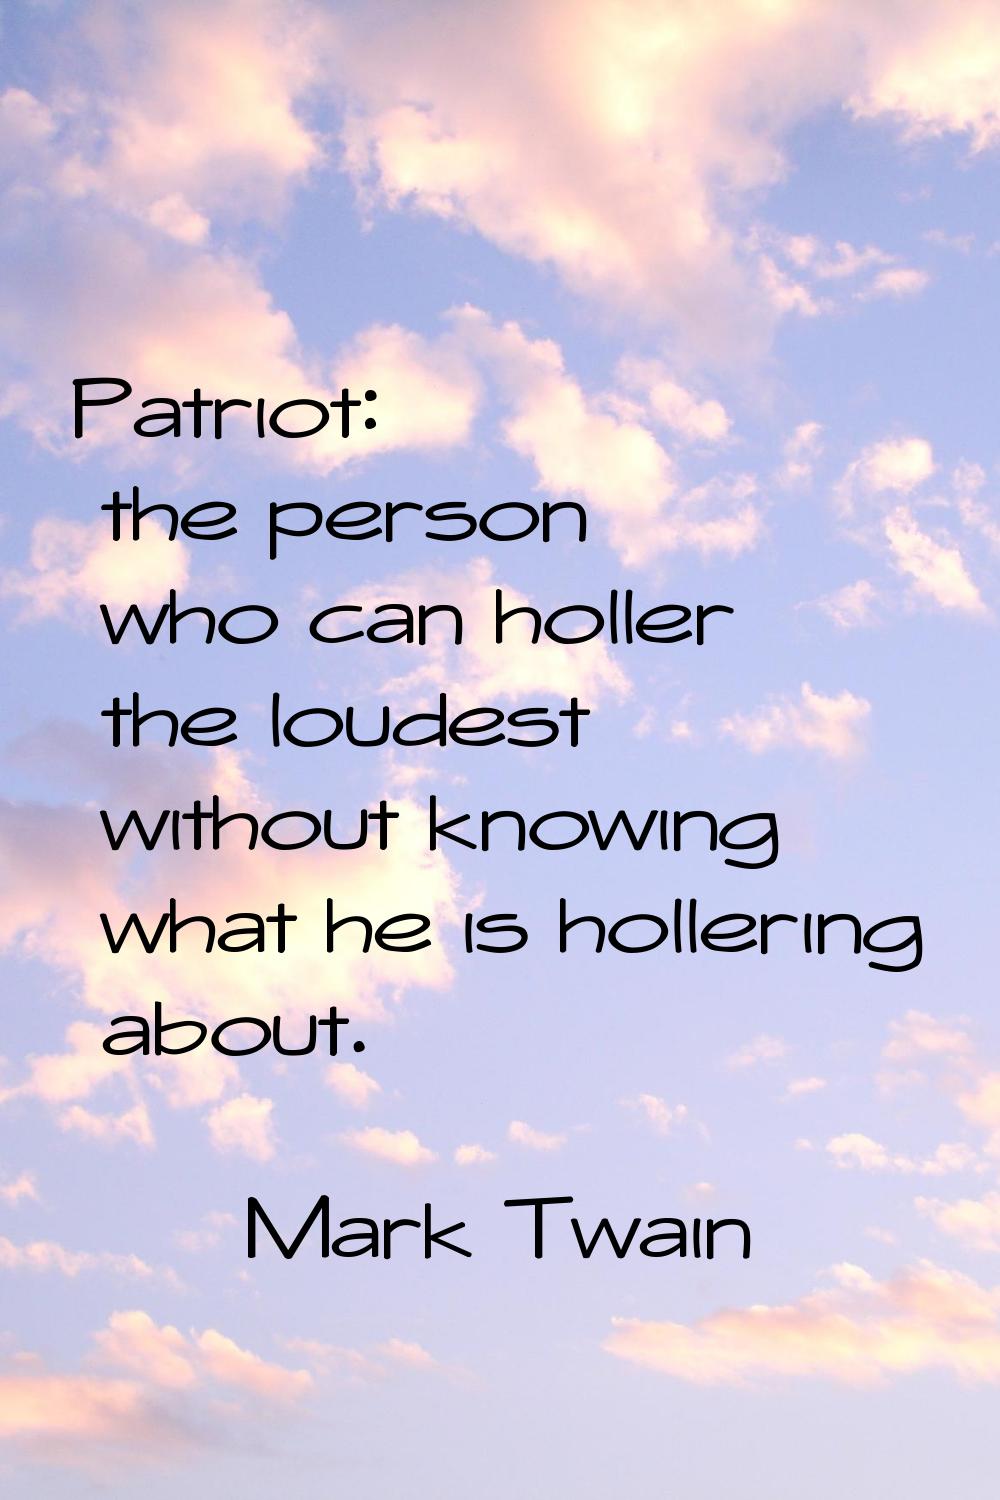 Patriot: the person who can holler the loudest without knowing what he is hollering about.